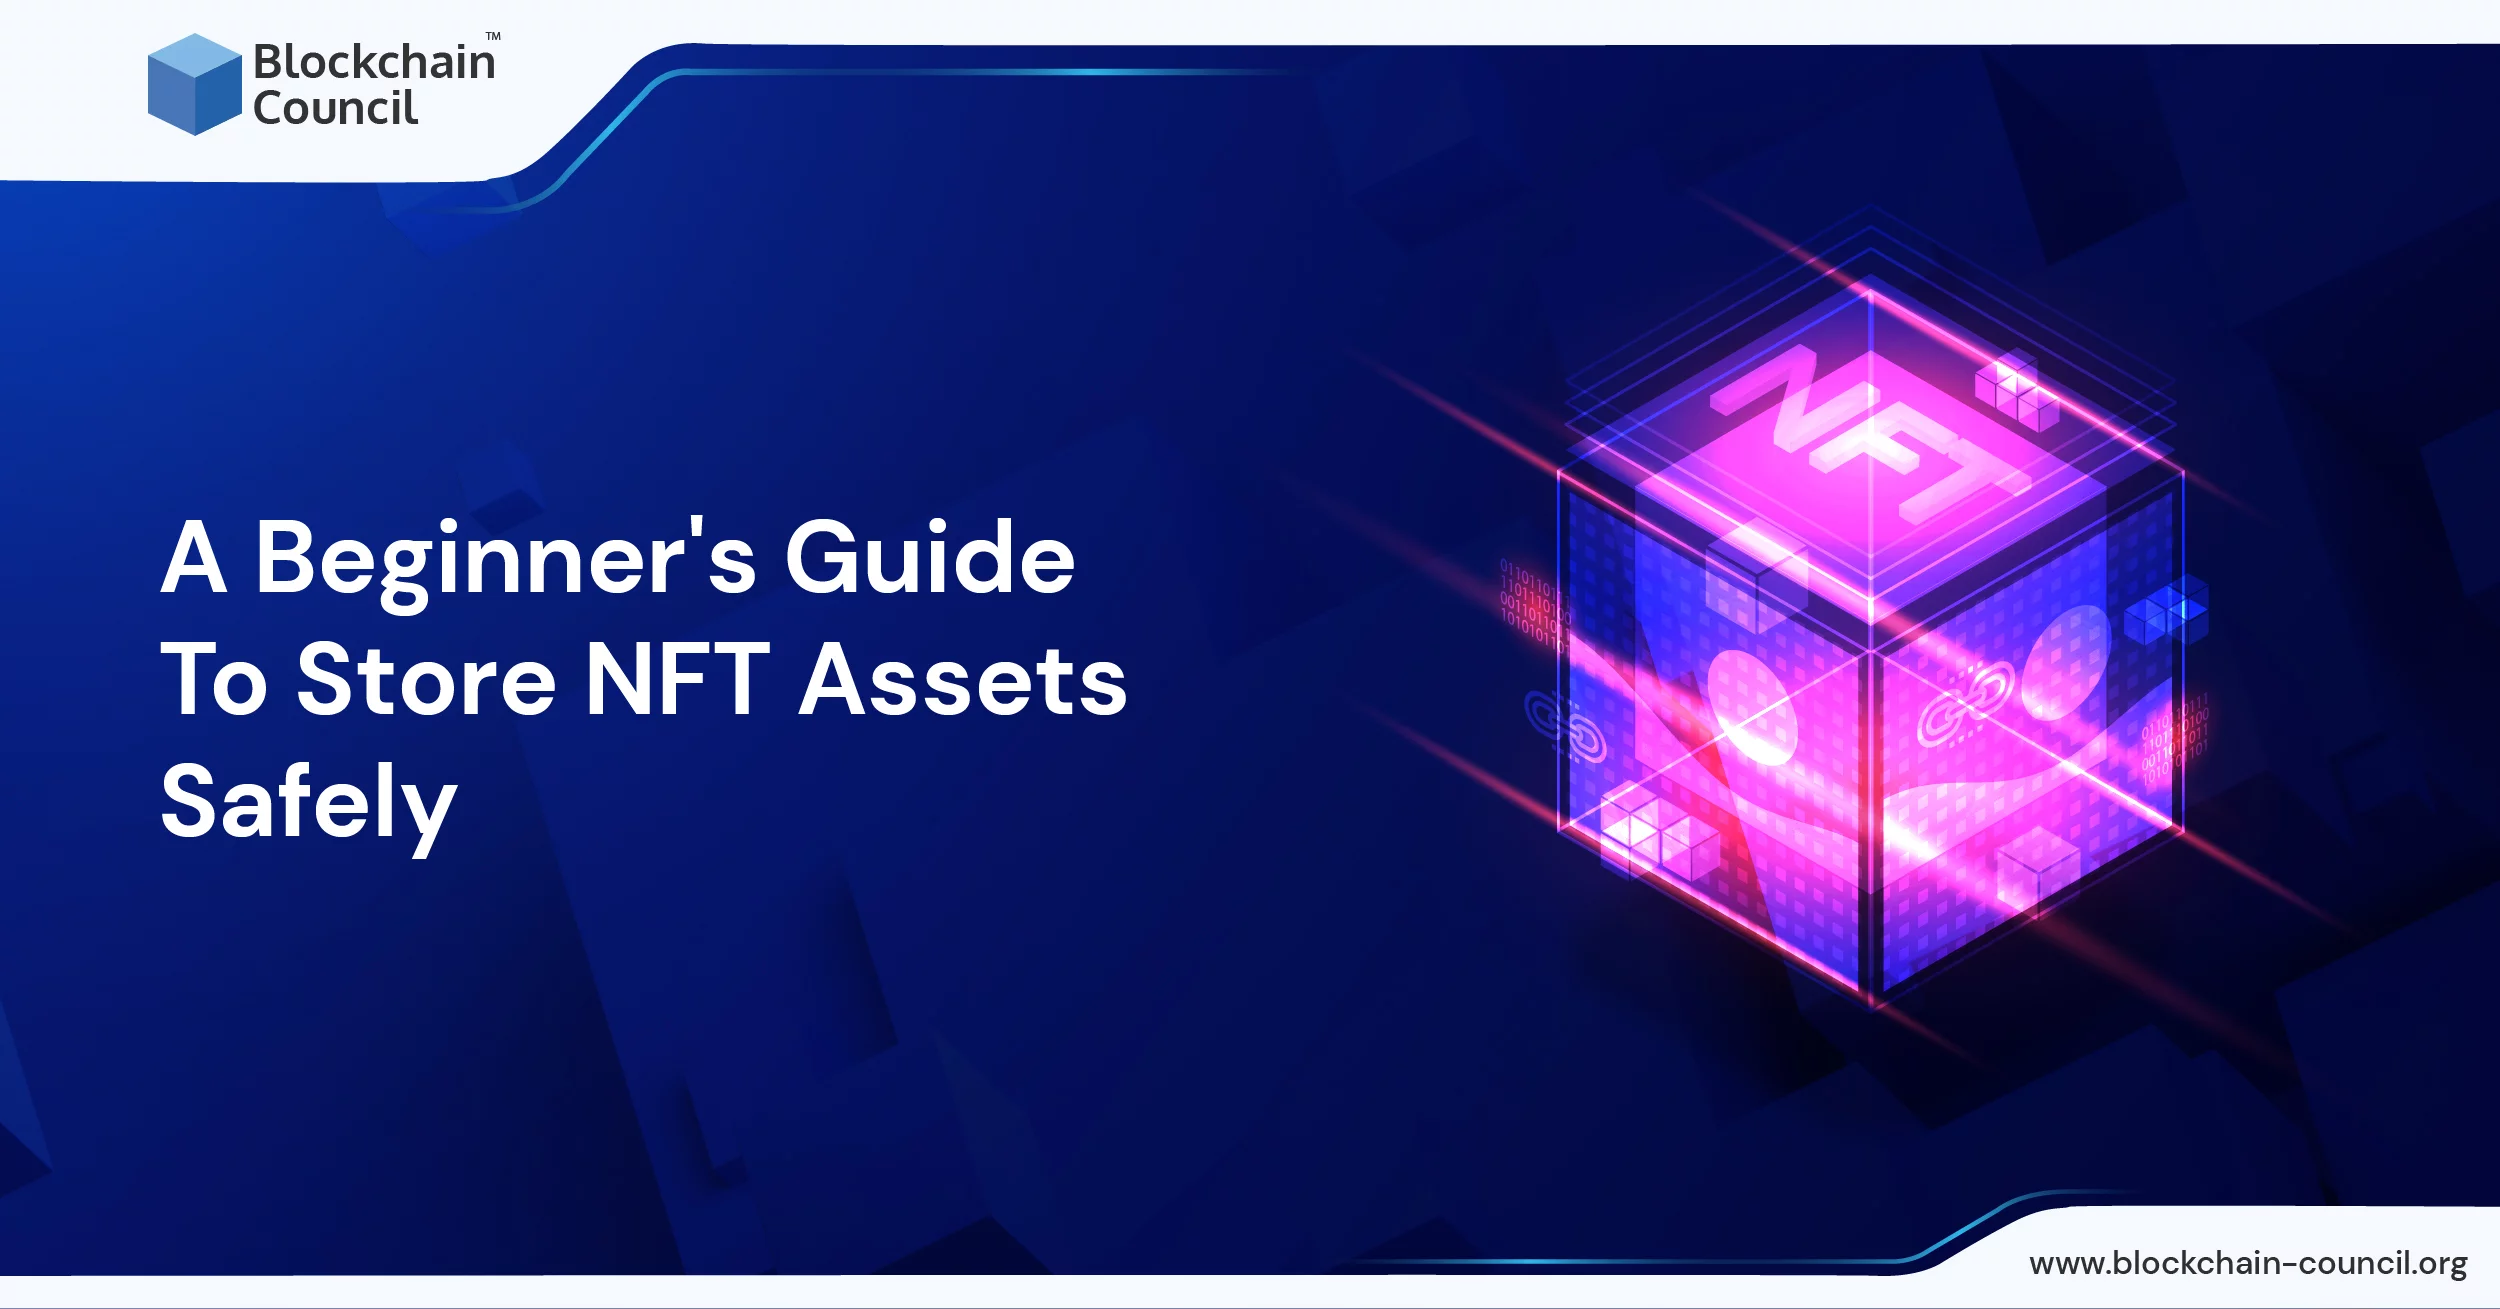 A Beginner's Guide To Store NFT Assets Safely